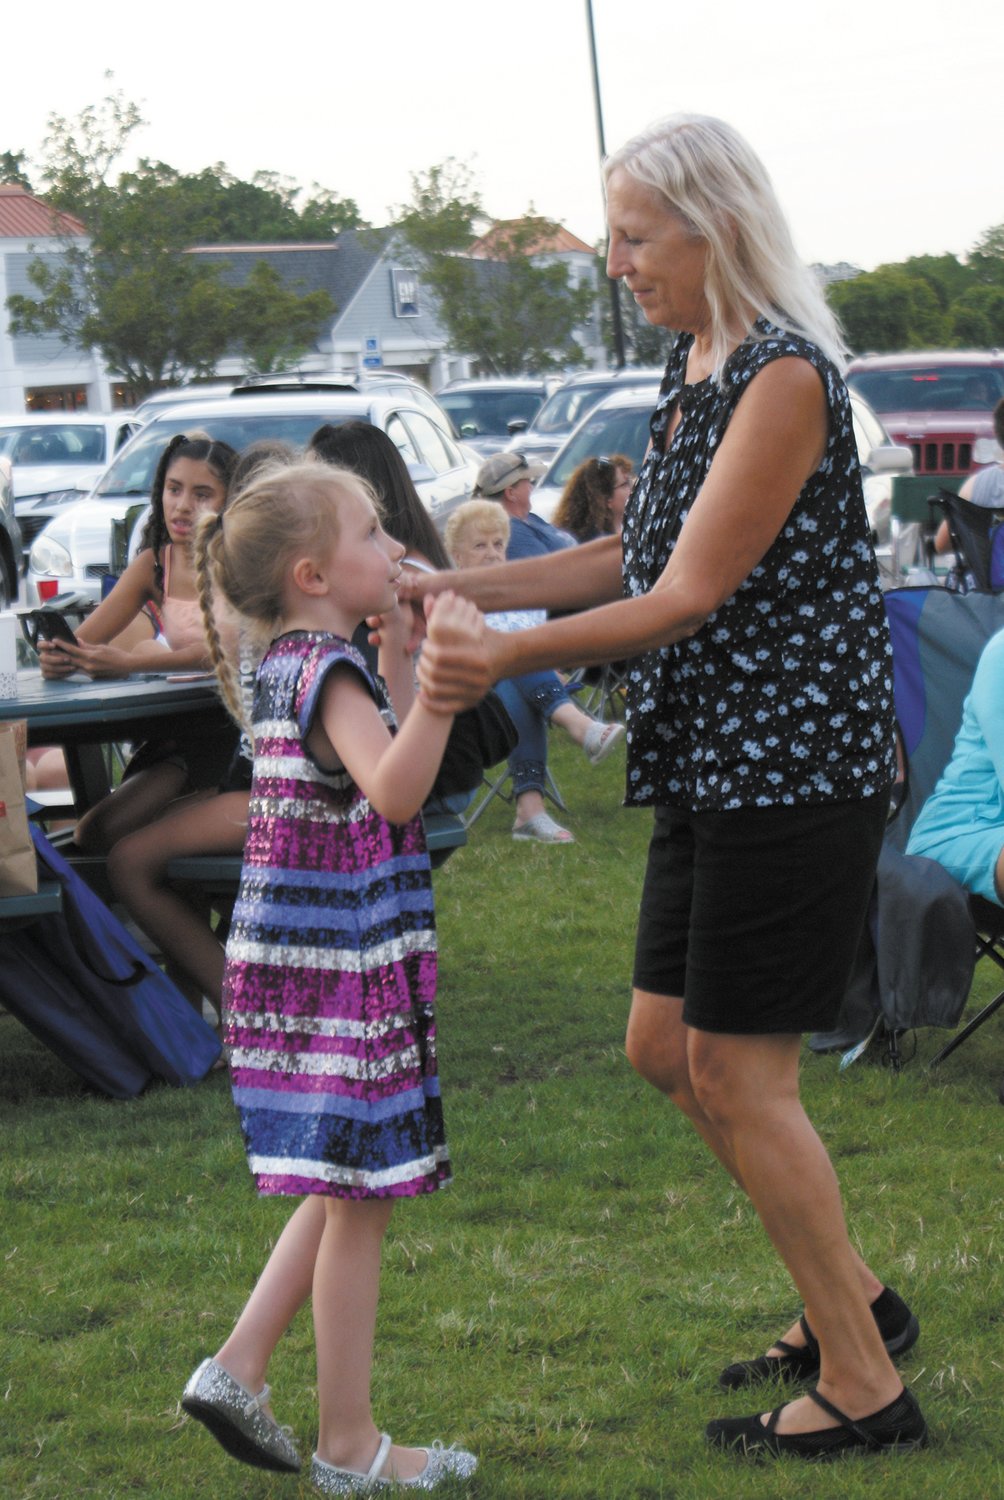 GROOVING TO TUNES: Seven-year-old Giovanna McKay enjoyed many dances with her grandmother Catherine Lonardo.